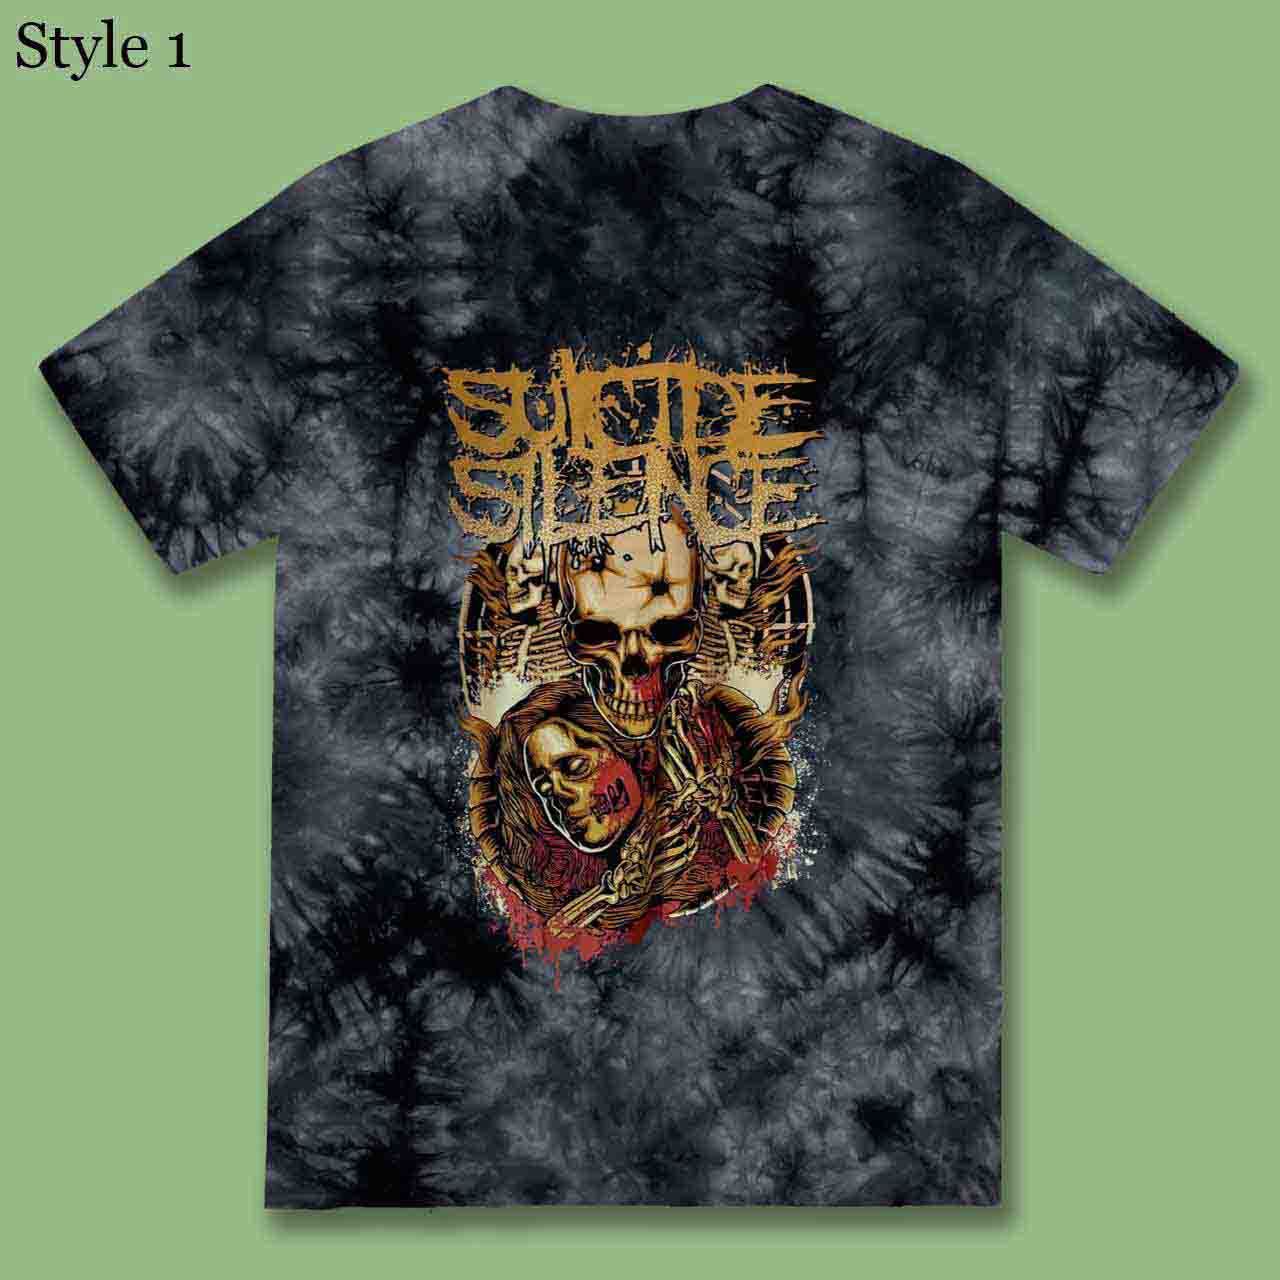 Vintage Suicide Silence The Suffering T-Shirt